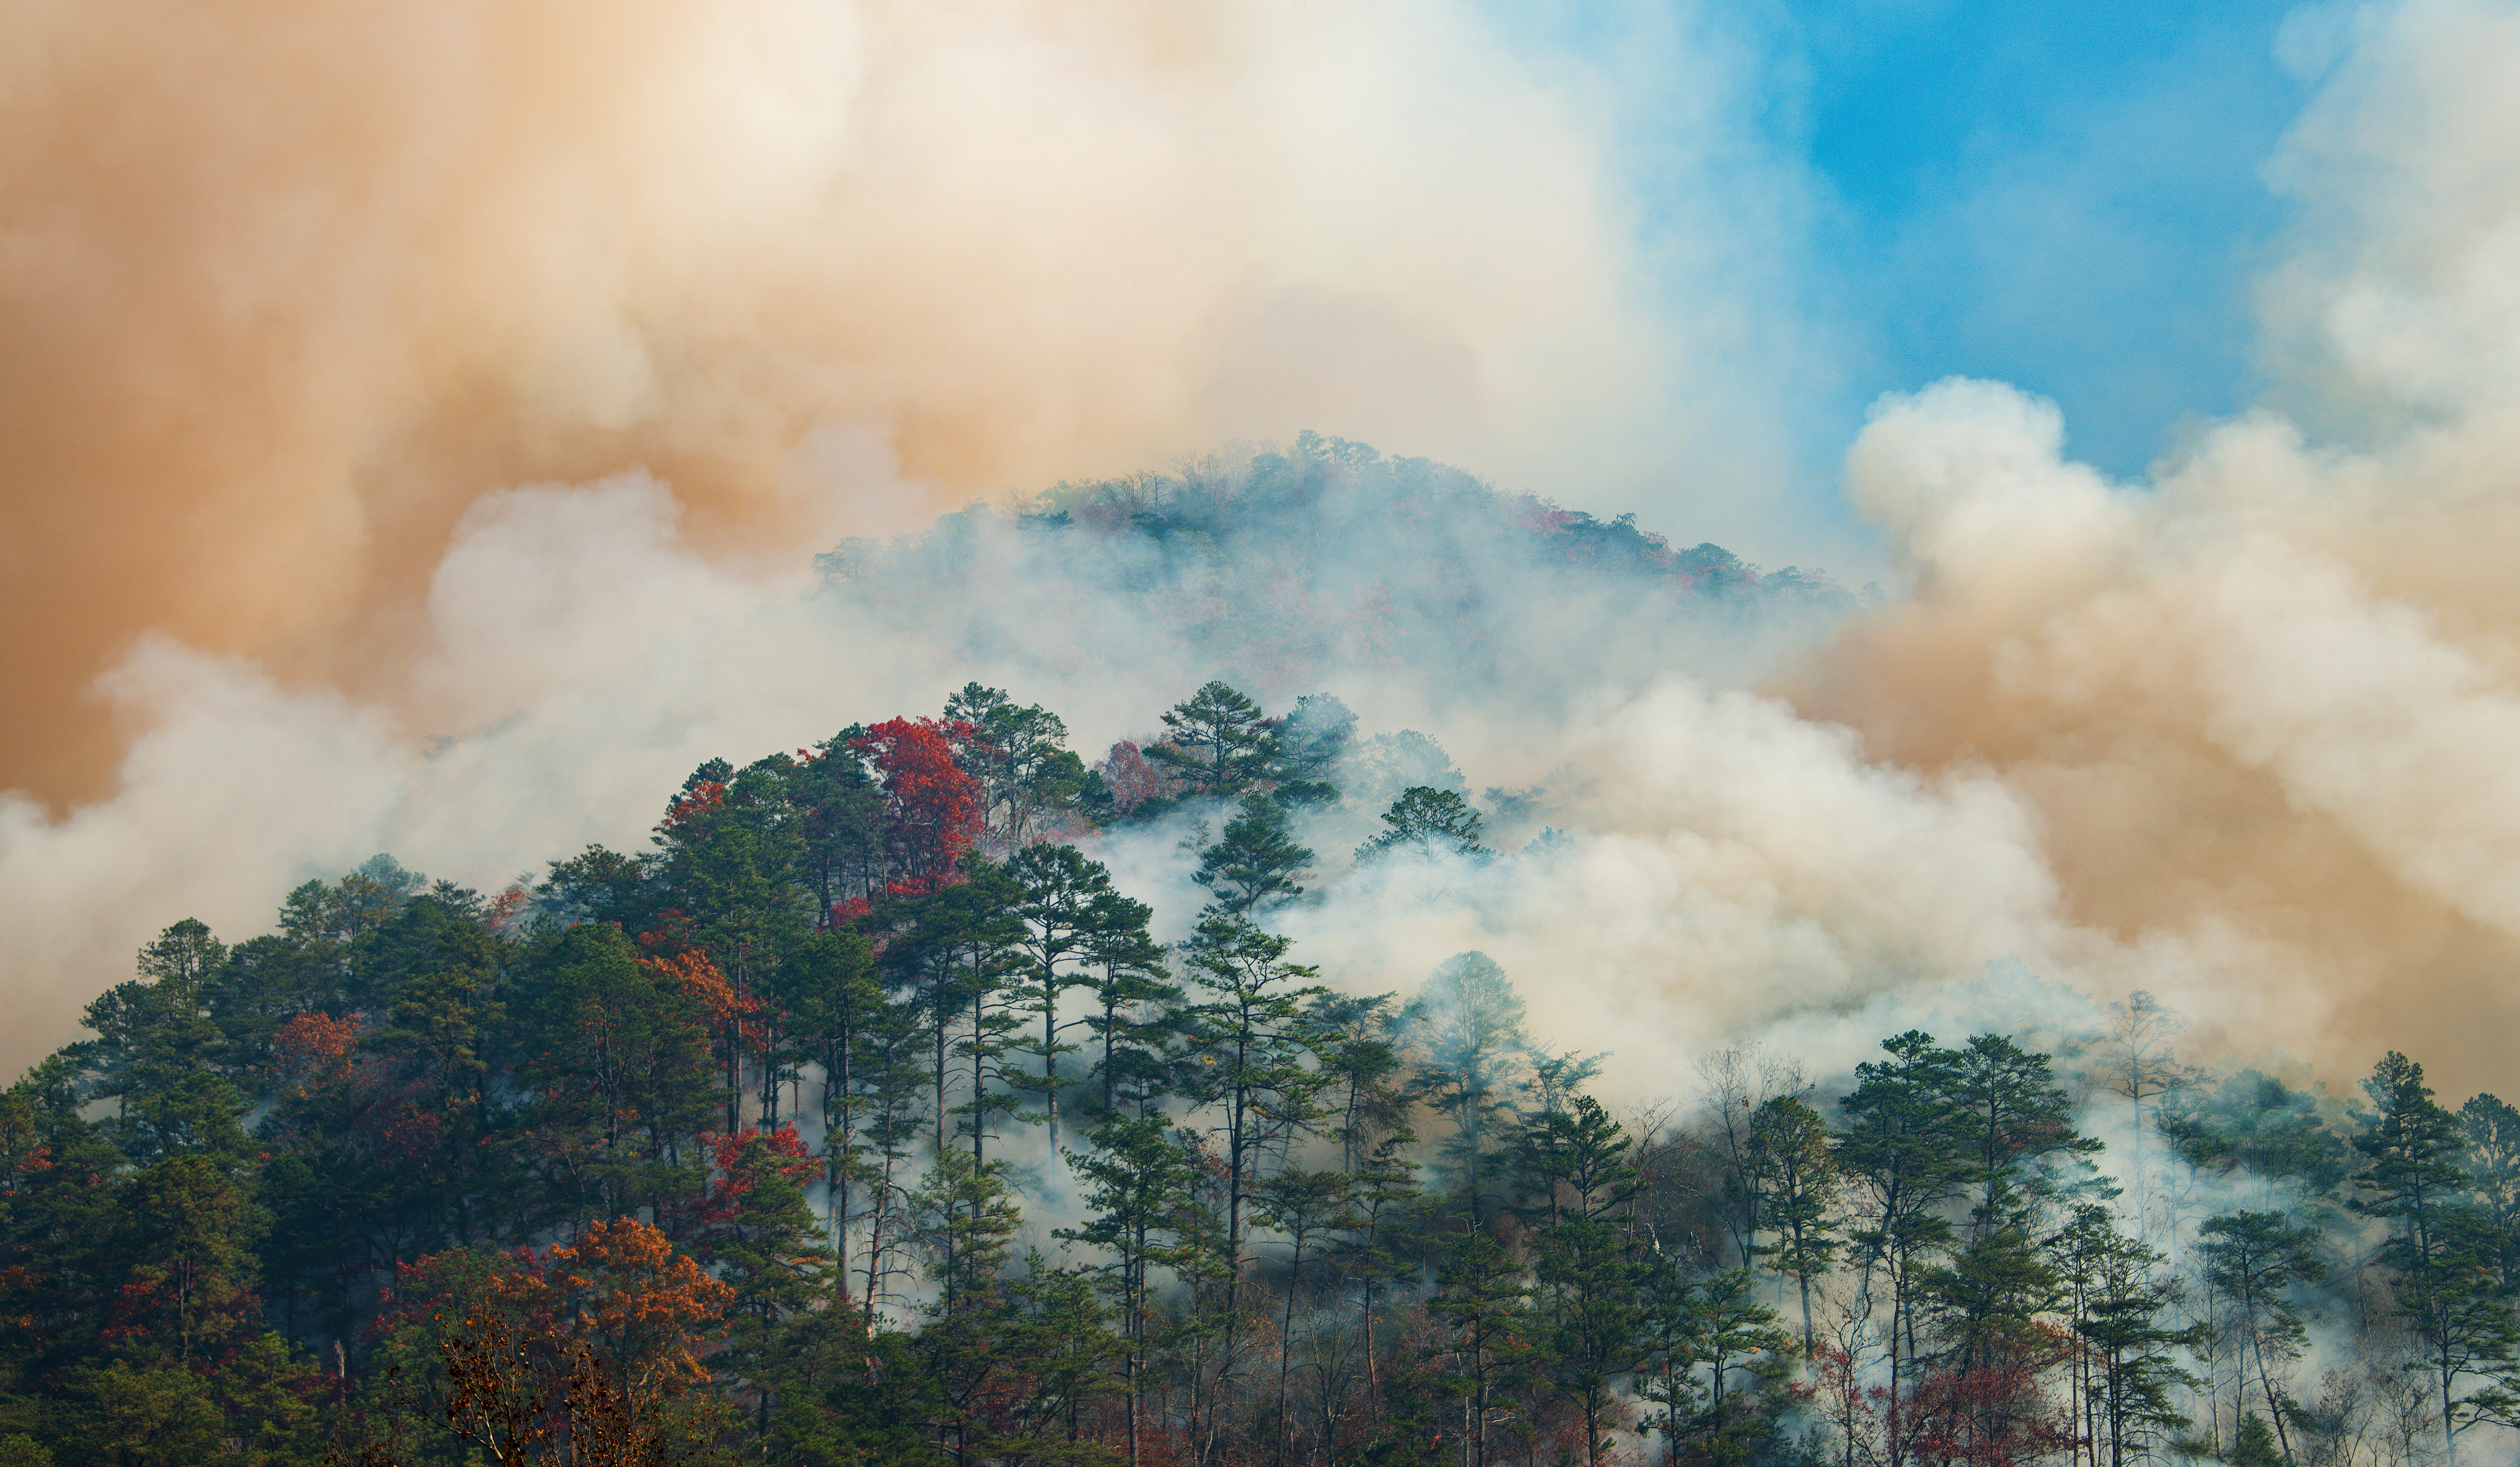 Smoke filling the air from wildfires in the Great Smoky Mountains in Tennessee